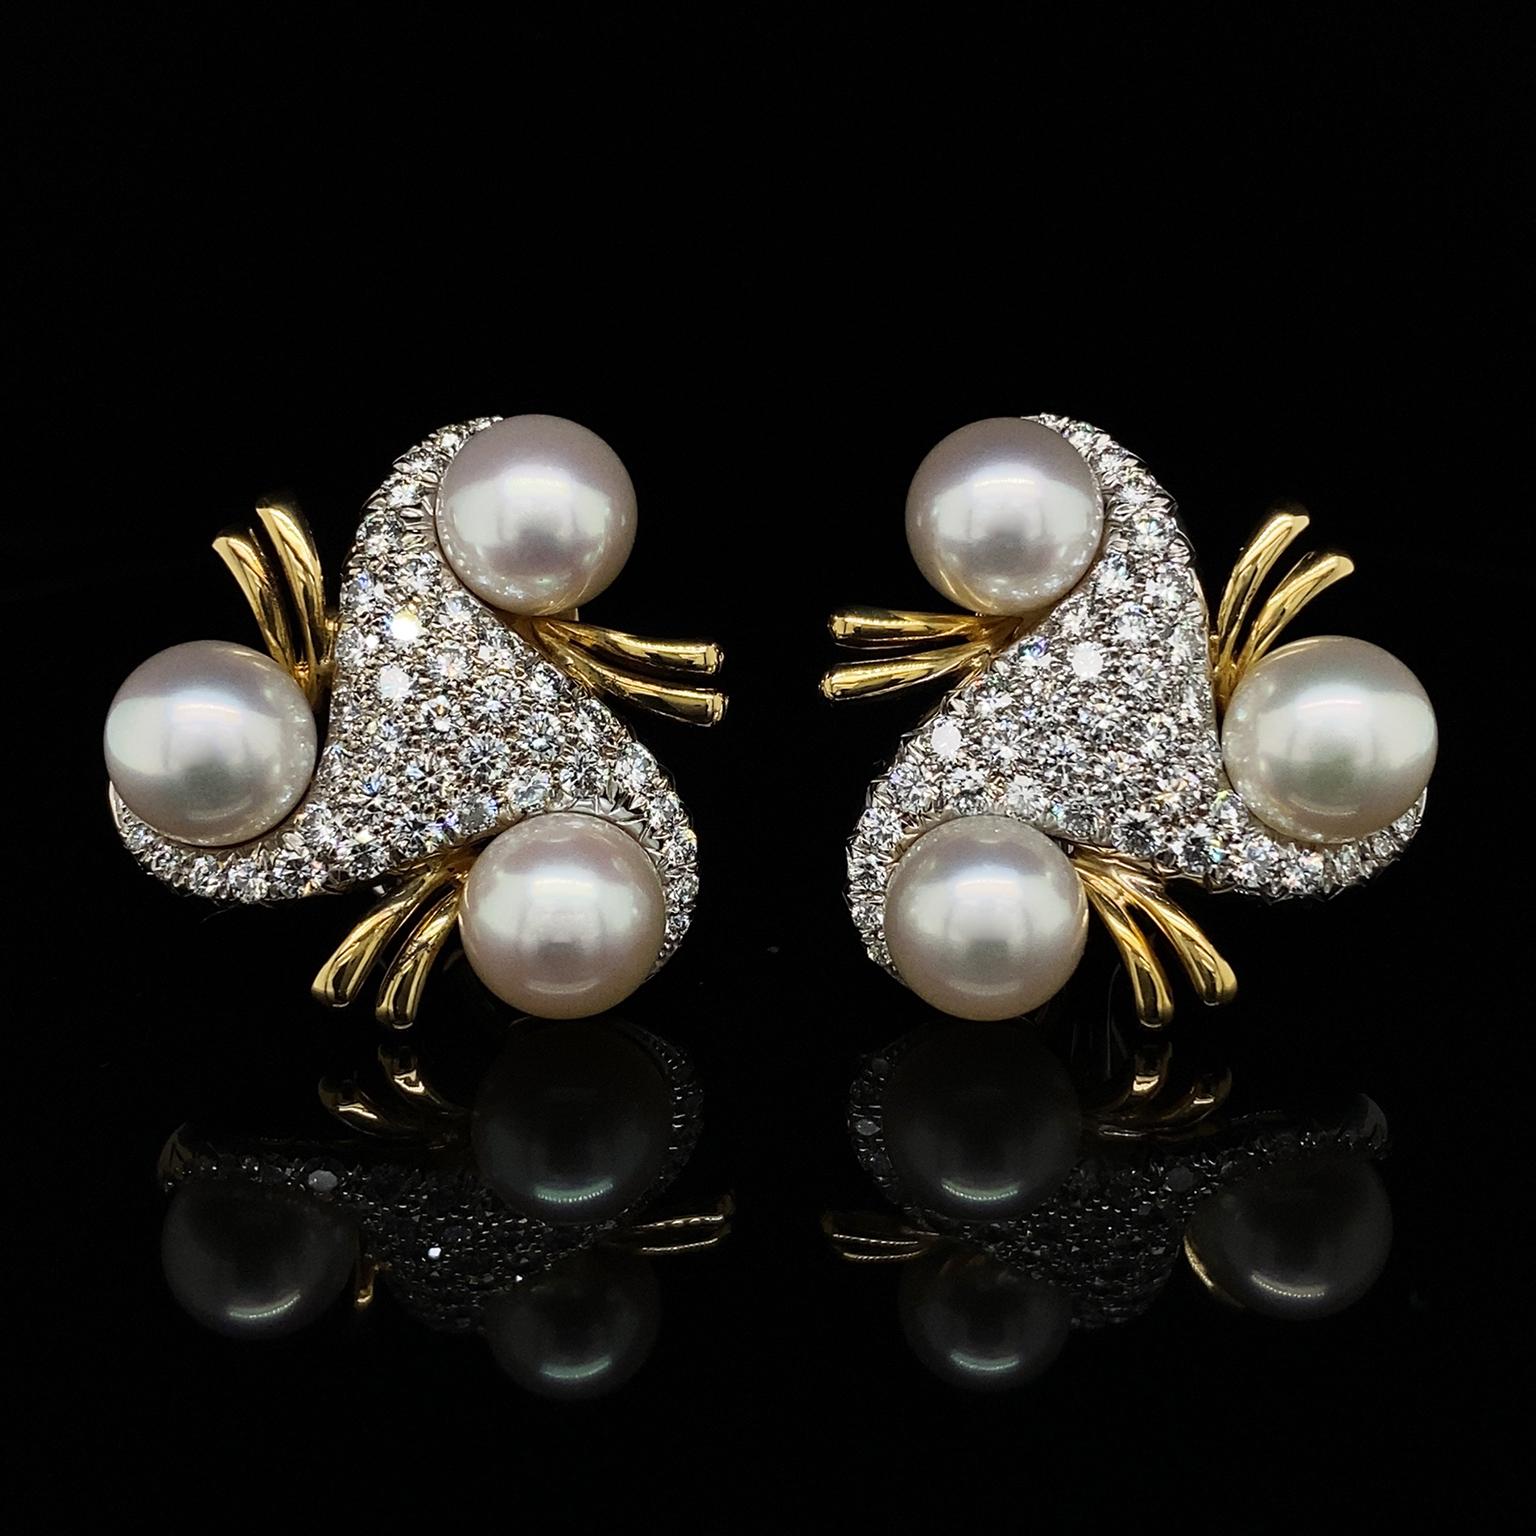 Round Cut Triangular Diamond and Pearl Earrings in 18K Yellow and White Gold Earrings For Sale